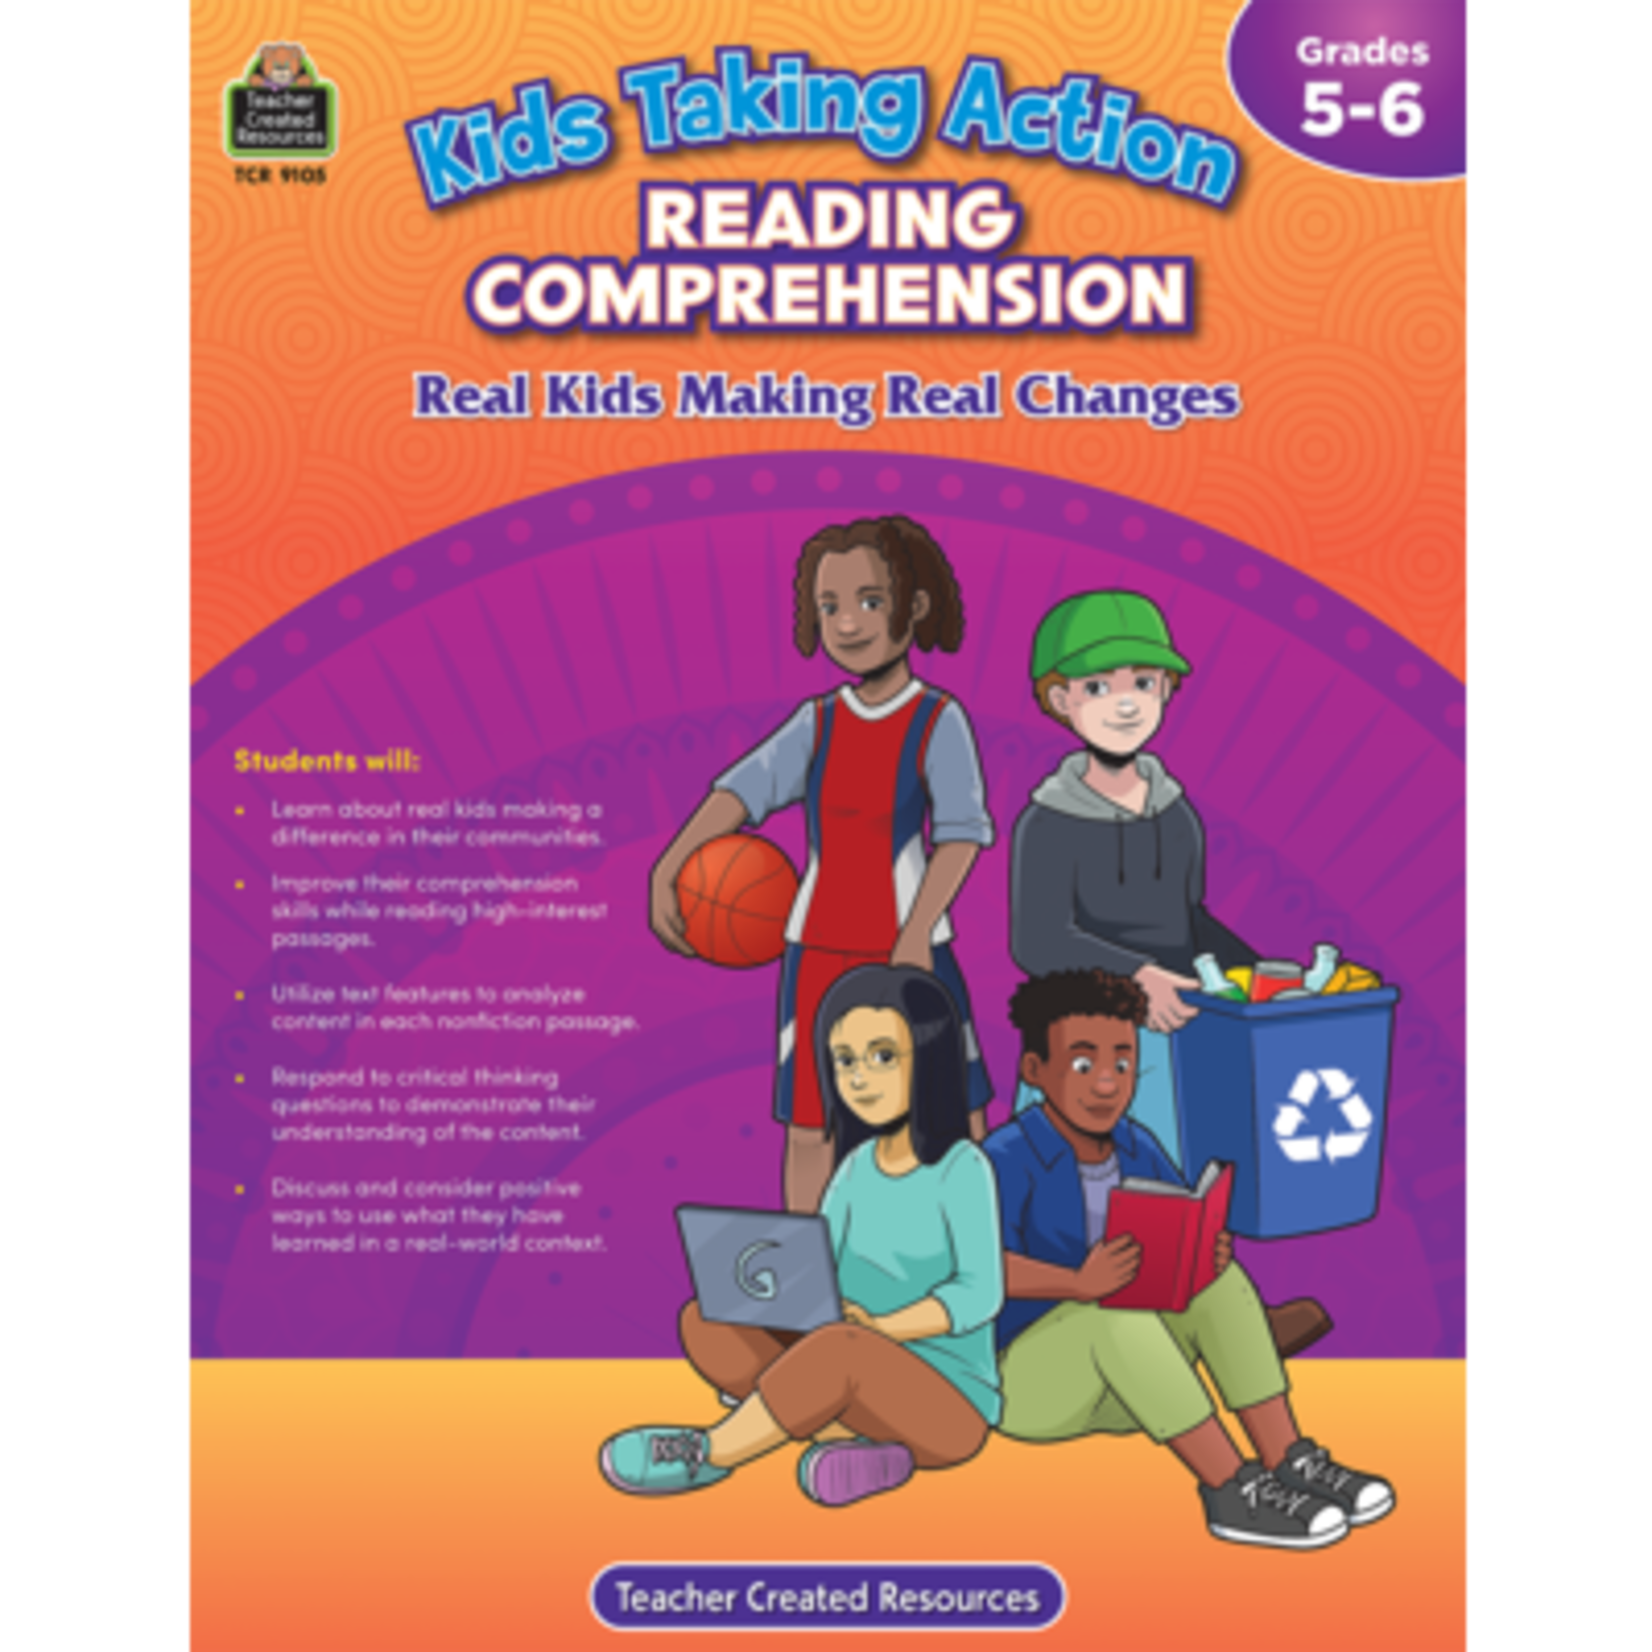 TEACHER CREATED RESOURCES Kids Taking Action: Reading Comprehension Grades 5-6